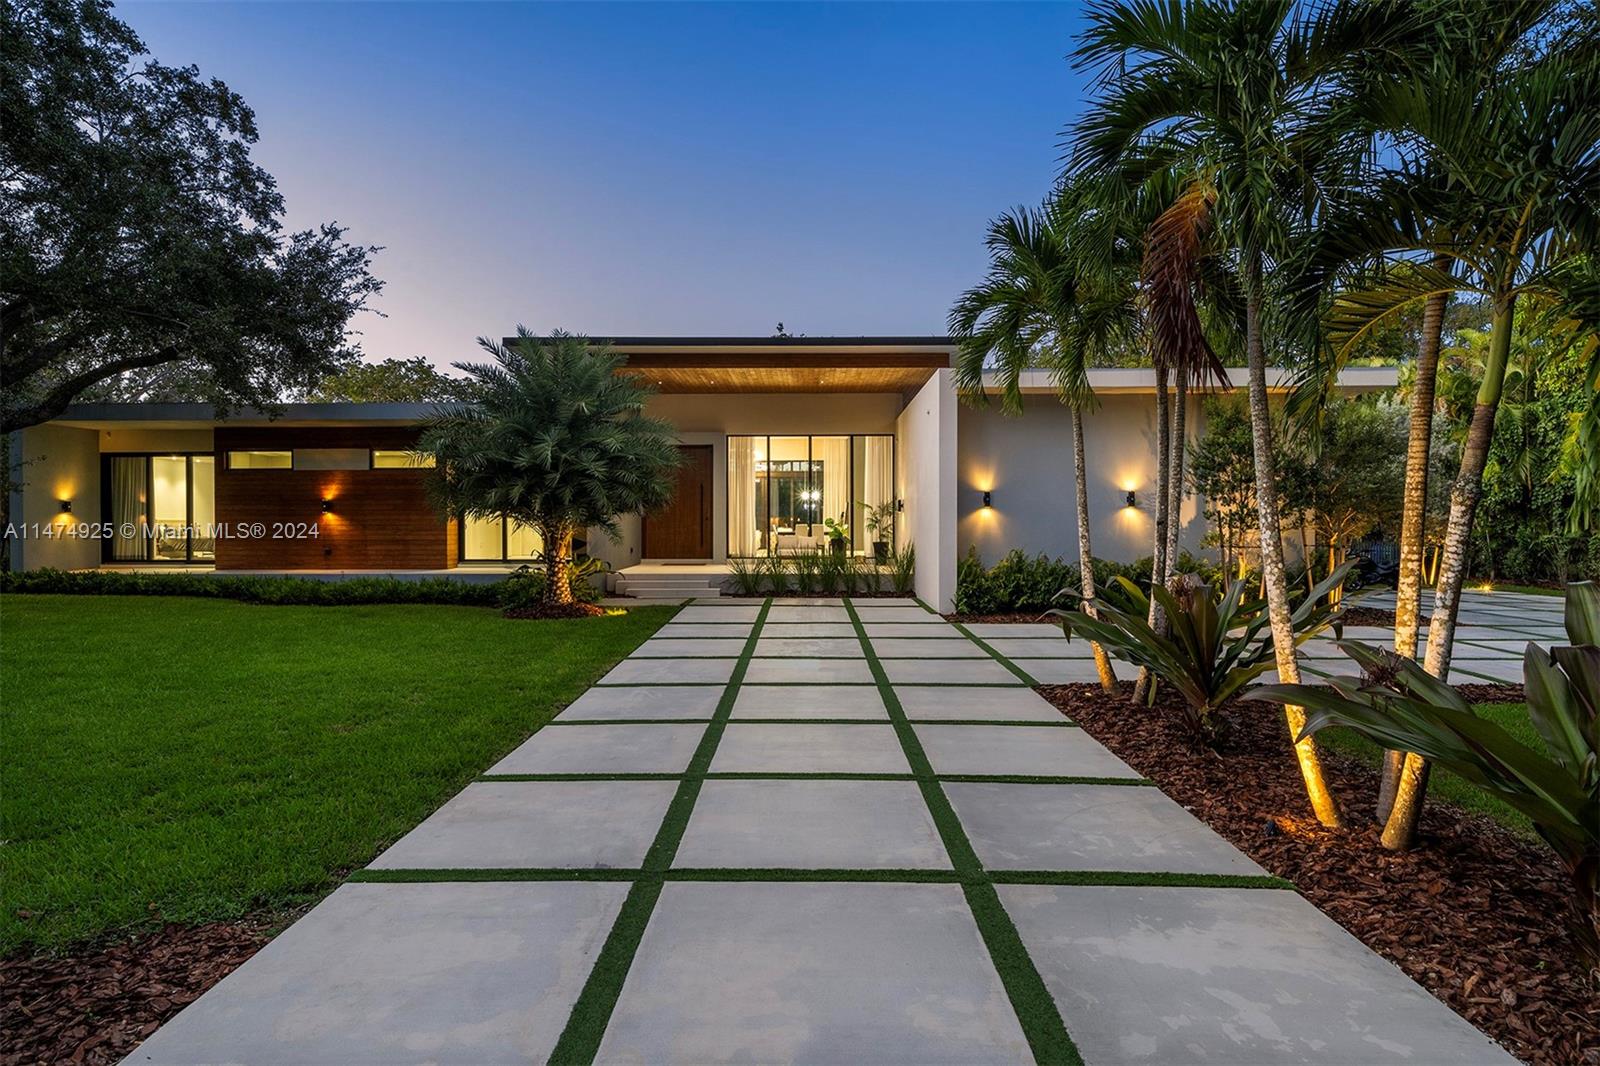 Nestled in the exclusive Pinecrest enclave, this masterpiece boasts 6 beds & 6.5 baths, on a generous 38,766 sqft lot. You'll be welcomed by the impressive 11 ft hurricane-proof Mahogany pivot door and ceilings ranging from 10 -14 ft. The home is adorned with stunning wallpaper, wood panel walls, electric blinds, & floating drywall, adding to its allure. The kitchen is a chef's paradise, featuring Italkraft cabinets, qrtz countertops, top-tier Miele, Wolf, & Liebherr appliances. Each bedroom offers a sanctuary with en-suite baths & designer Mia Cucina closets. Additionally, there is a guest house on the property. Convenience is key, with proximity to elite schools, high-end shopping, pristine beaches, & easy access to expressways, making this property the epitome of luxurious living.